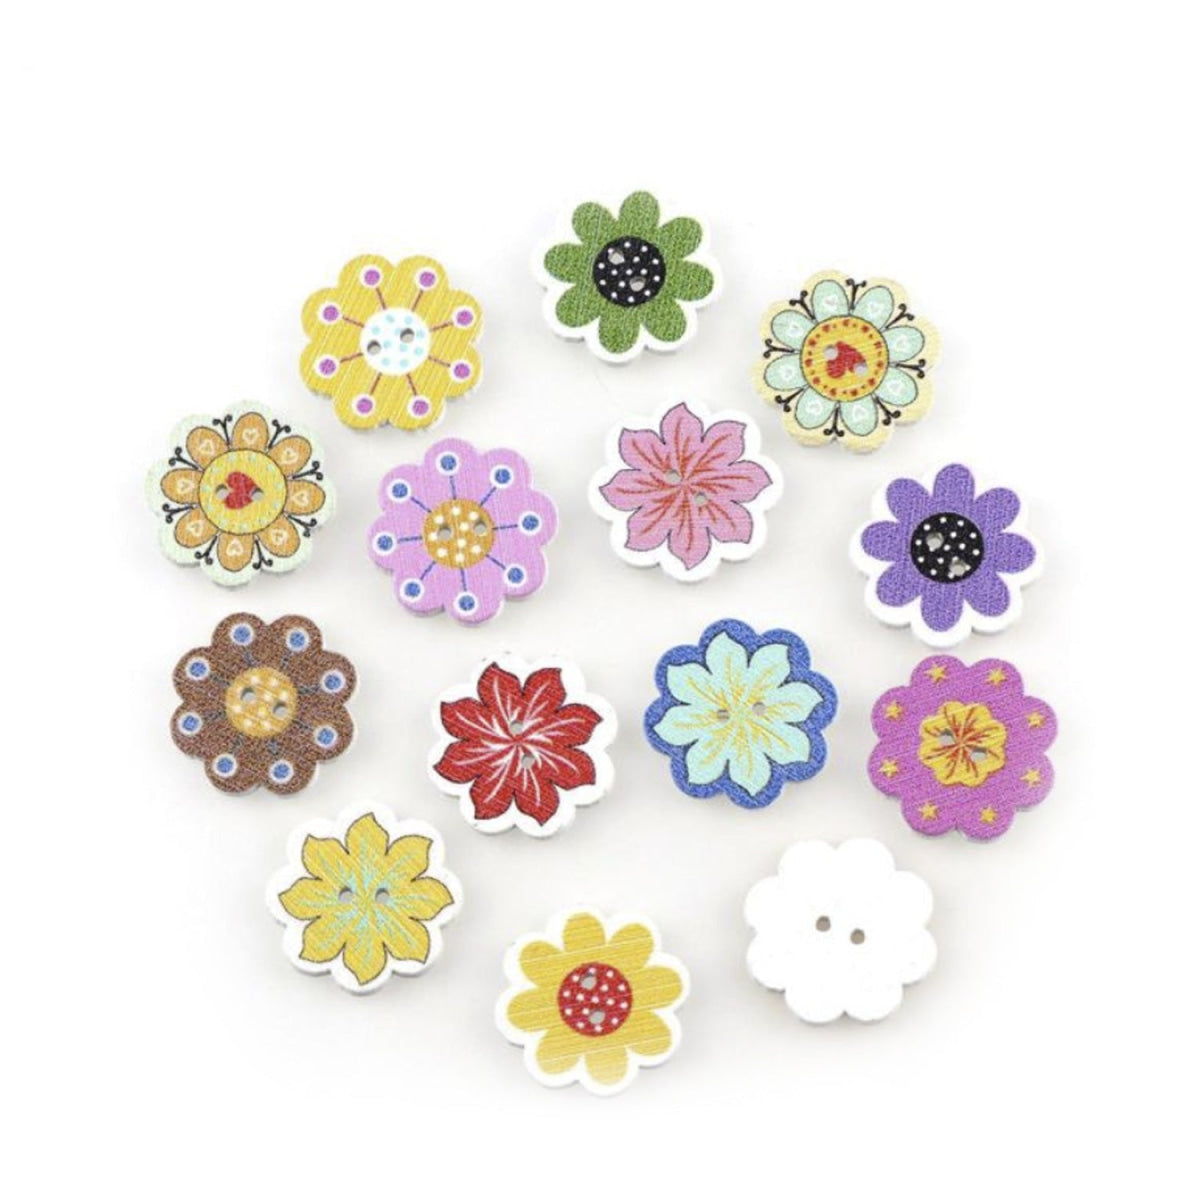 50X 20-25Mm White Wooden Buttons Colourful Flower Edge Shape Design Scrapbook Sewing Accessories Diy